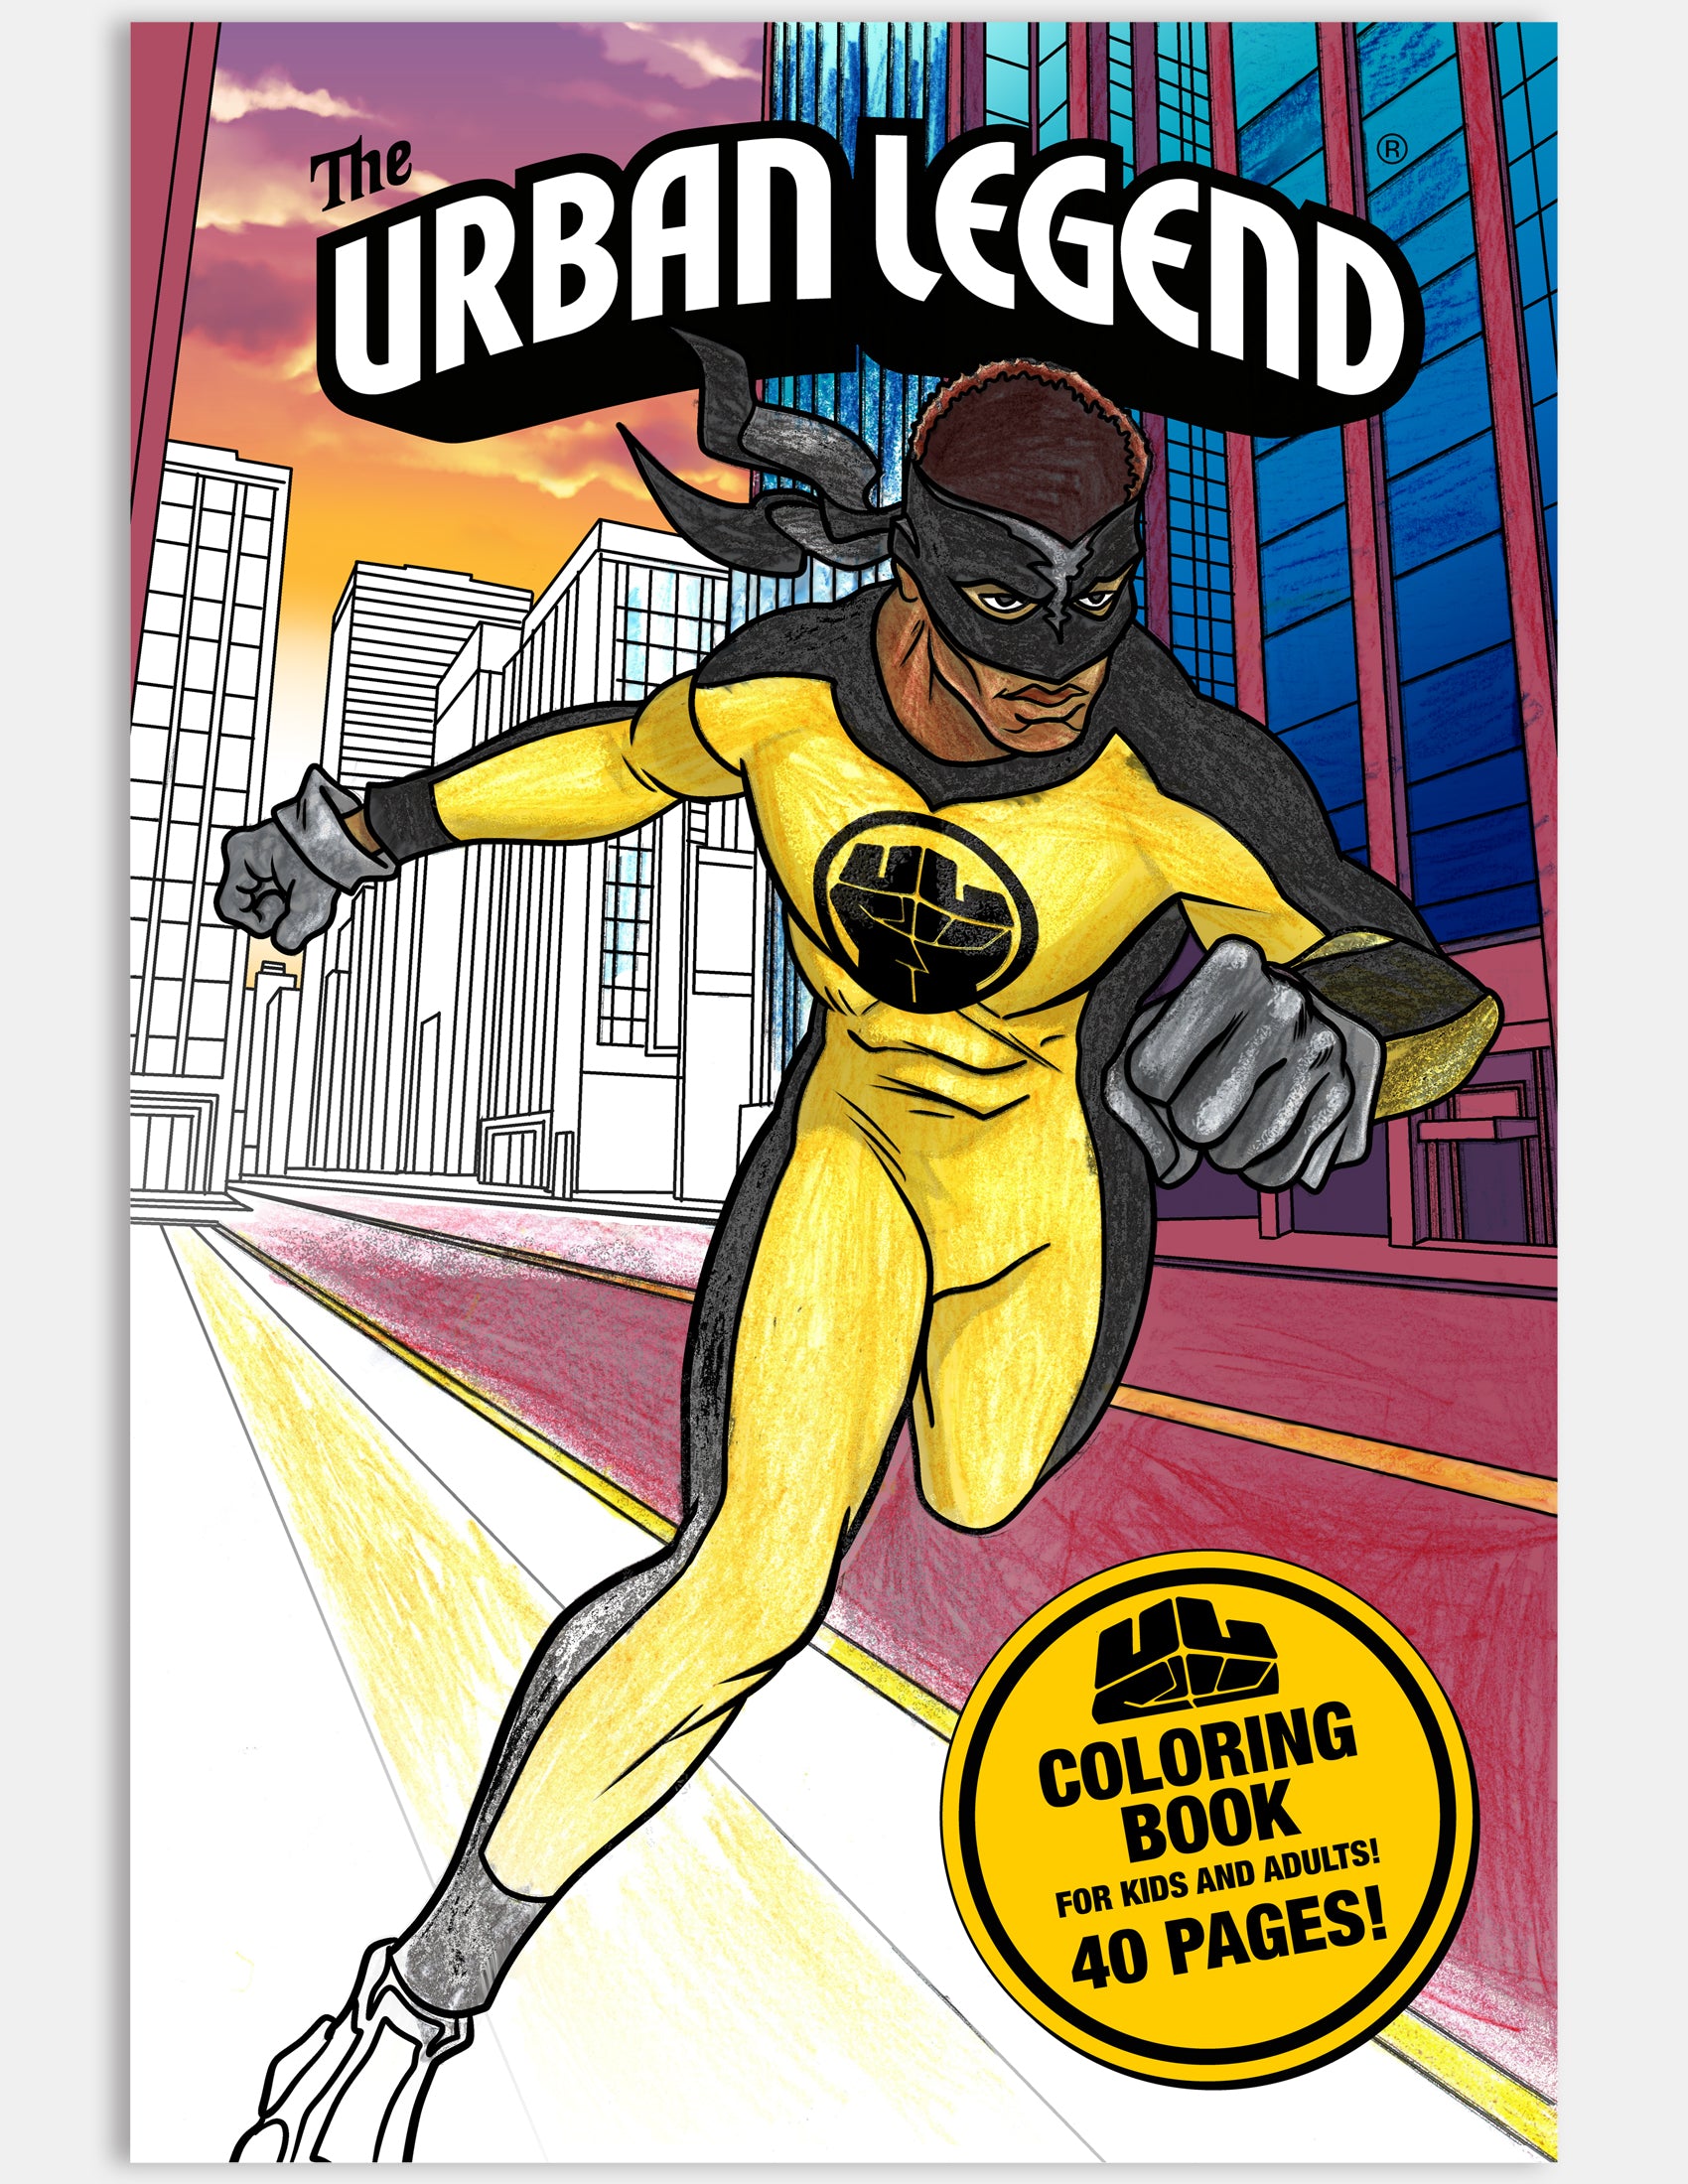 The Urban Legend - Coloring book (40 pages)